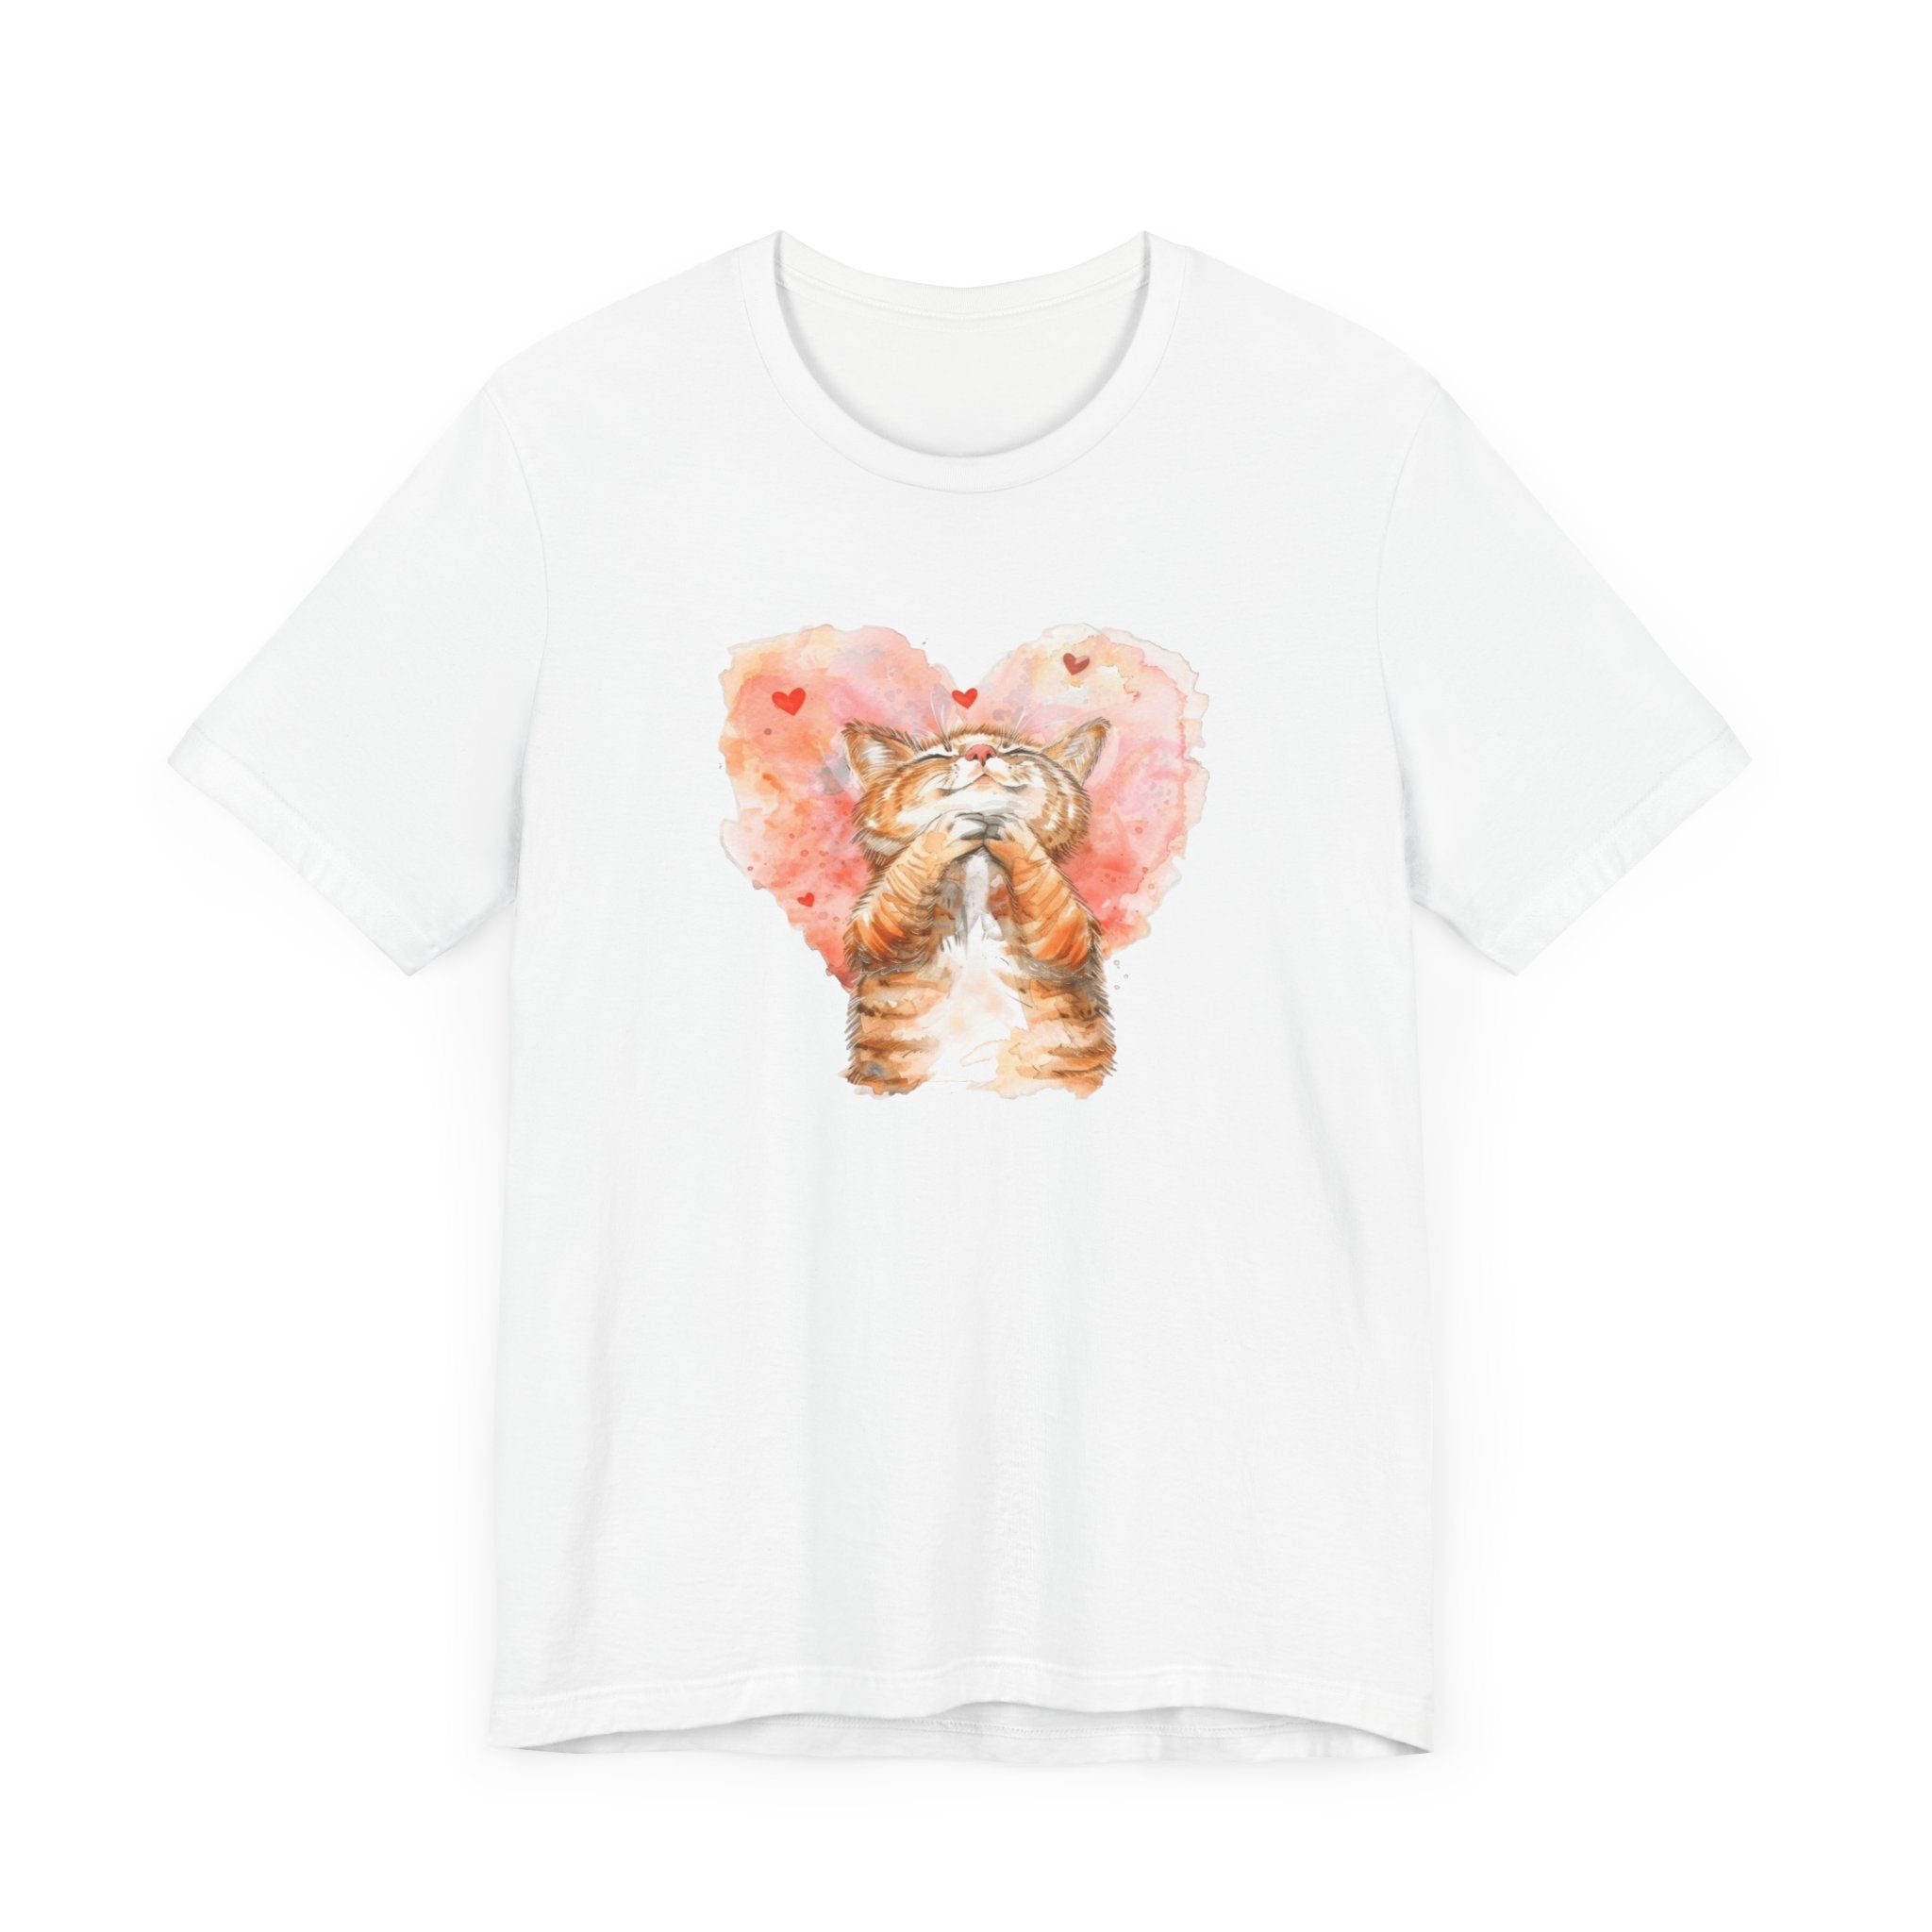 Love Whiskers Tee - Watercolor Heart & Cat T-Shirt